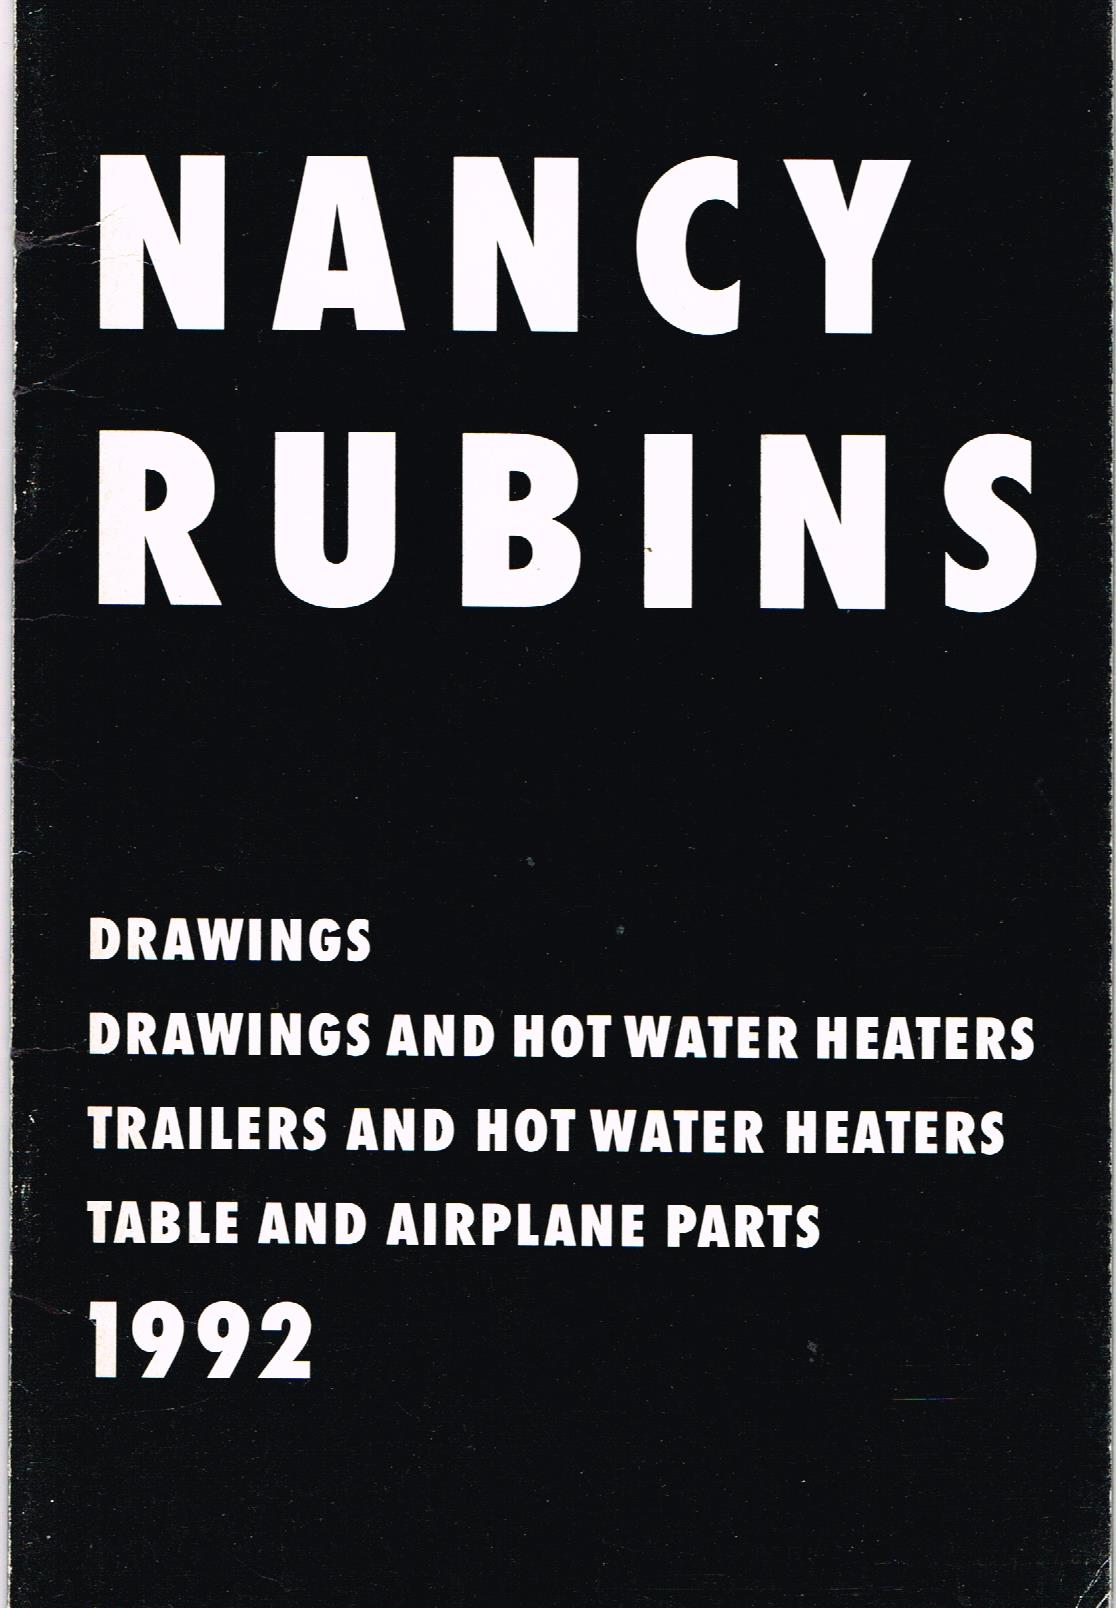 (RUBINS, NANCY). Rubins, Nancy - NANCY RUBINS: DRAWINGS, DRAWINGS AND HOT WATER HEATERS, TRAILERS AND HOT WATER HEATERS, TABLE AND AIRPLANE PARTS, 1992 (ON THE OCCASION OF THE EXHIBITION LAX)